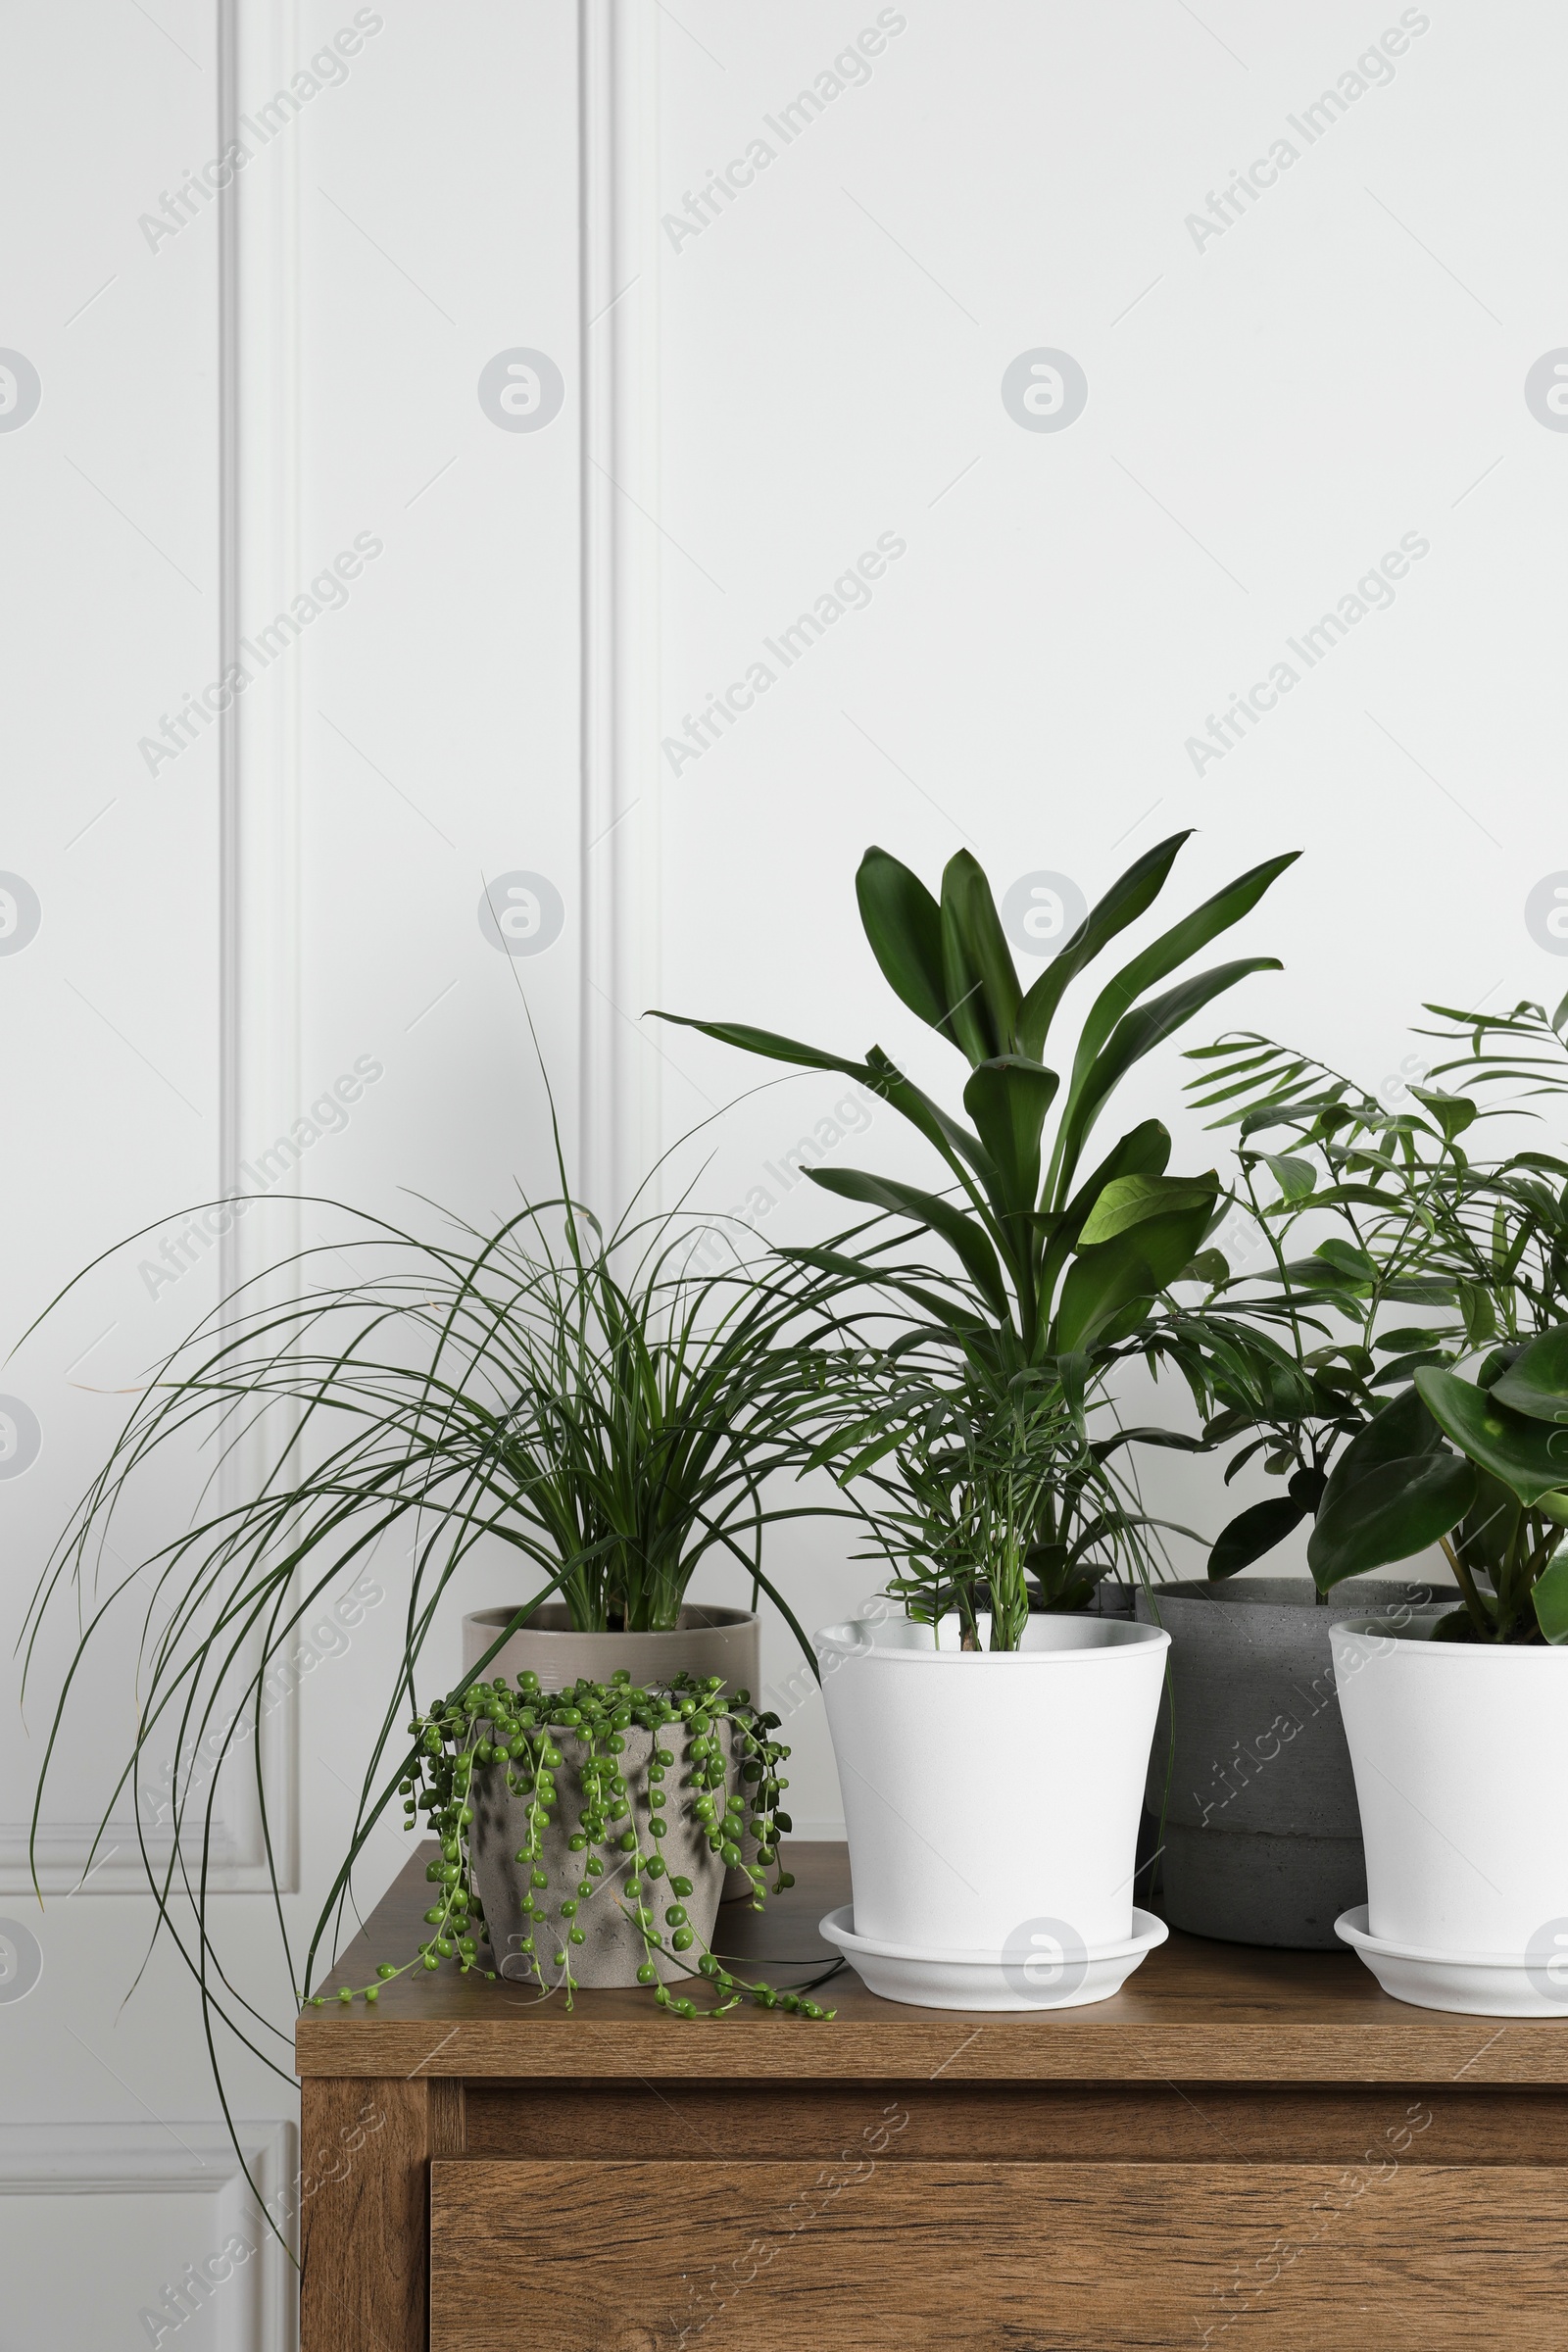 Photo of Many beautiful green potted houseplants on wooden table indoors